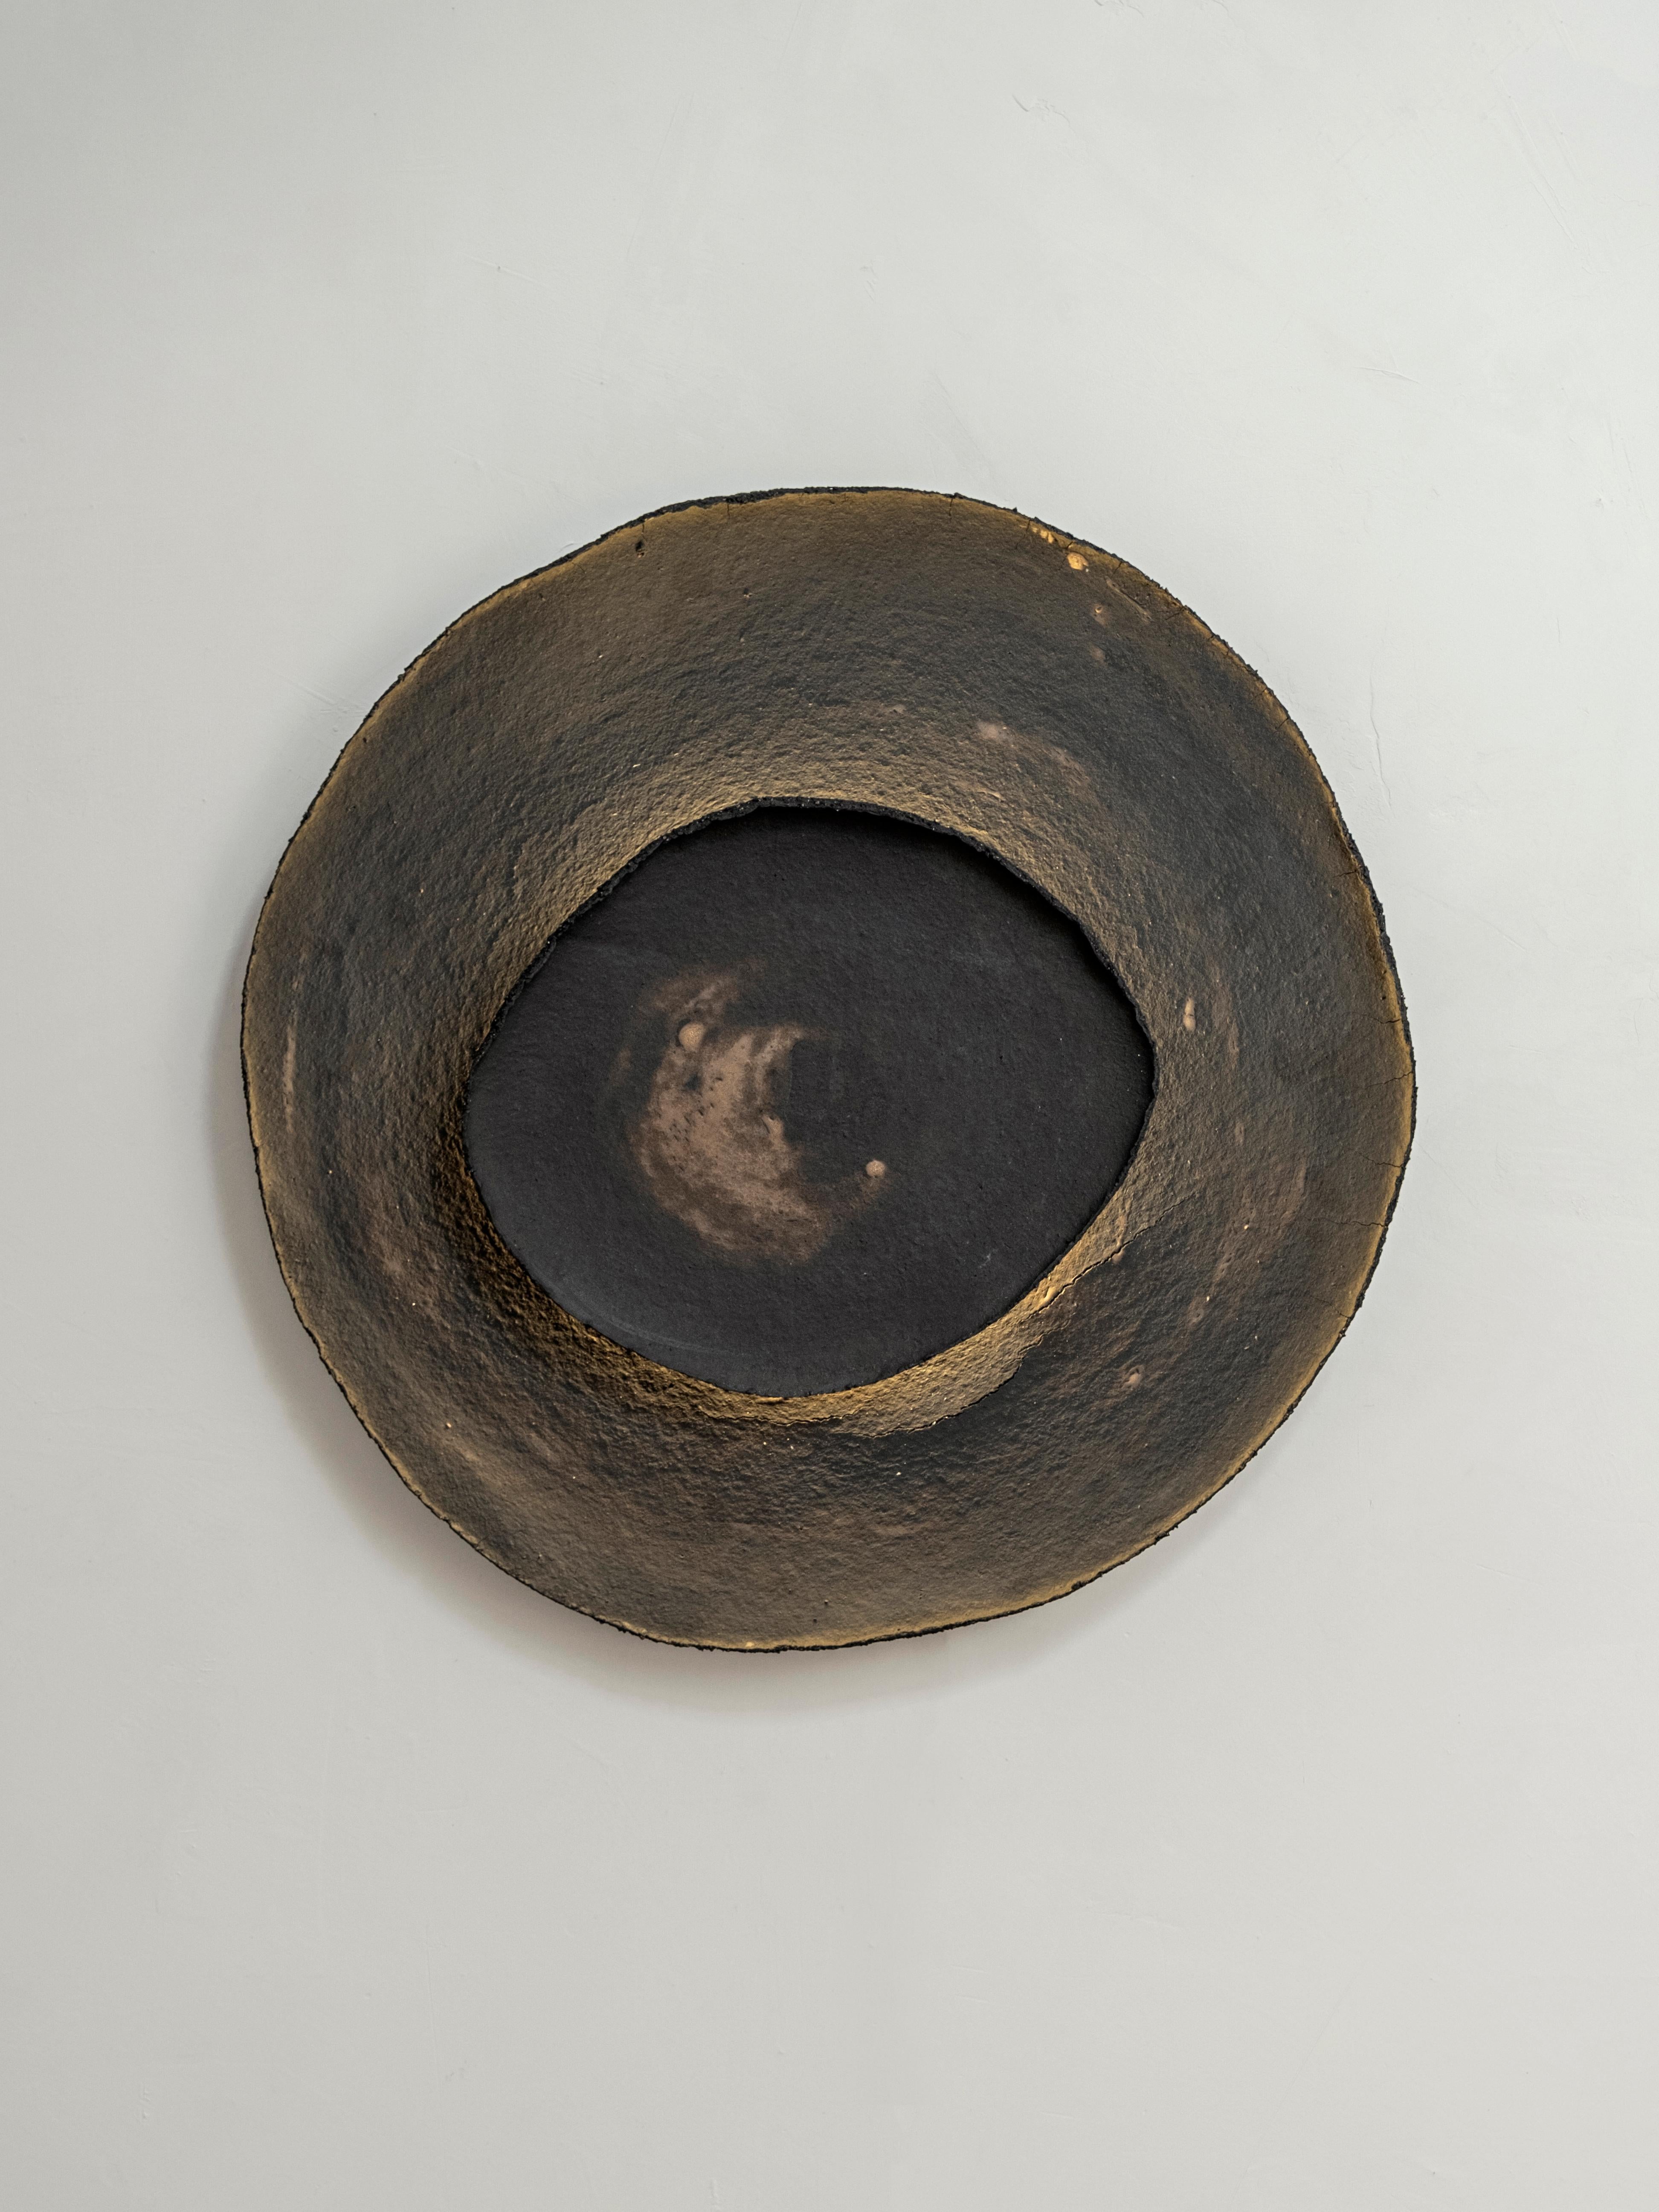 Ash #8 wall light by Margaux Leycuras.
One of a Kind, Signed and numbered.
Dimensions: Ø57 cm.
Material: Ceramic, black stoneware with burnished gold glaze.
The piece is signed, numbered and delivered with a certificate of authenticity.

The